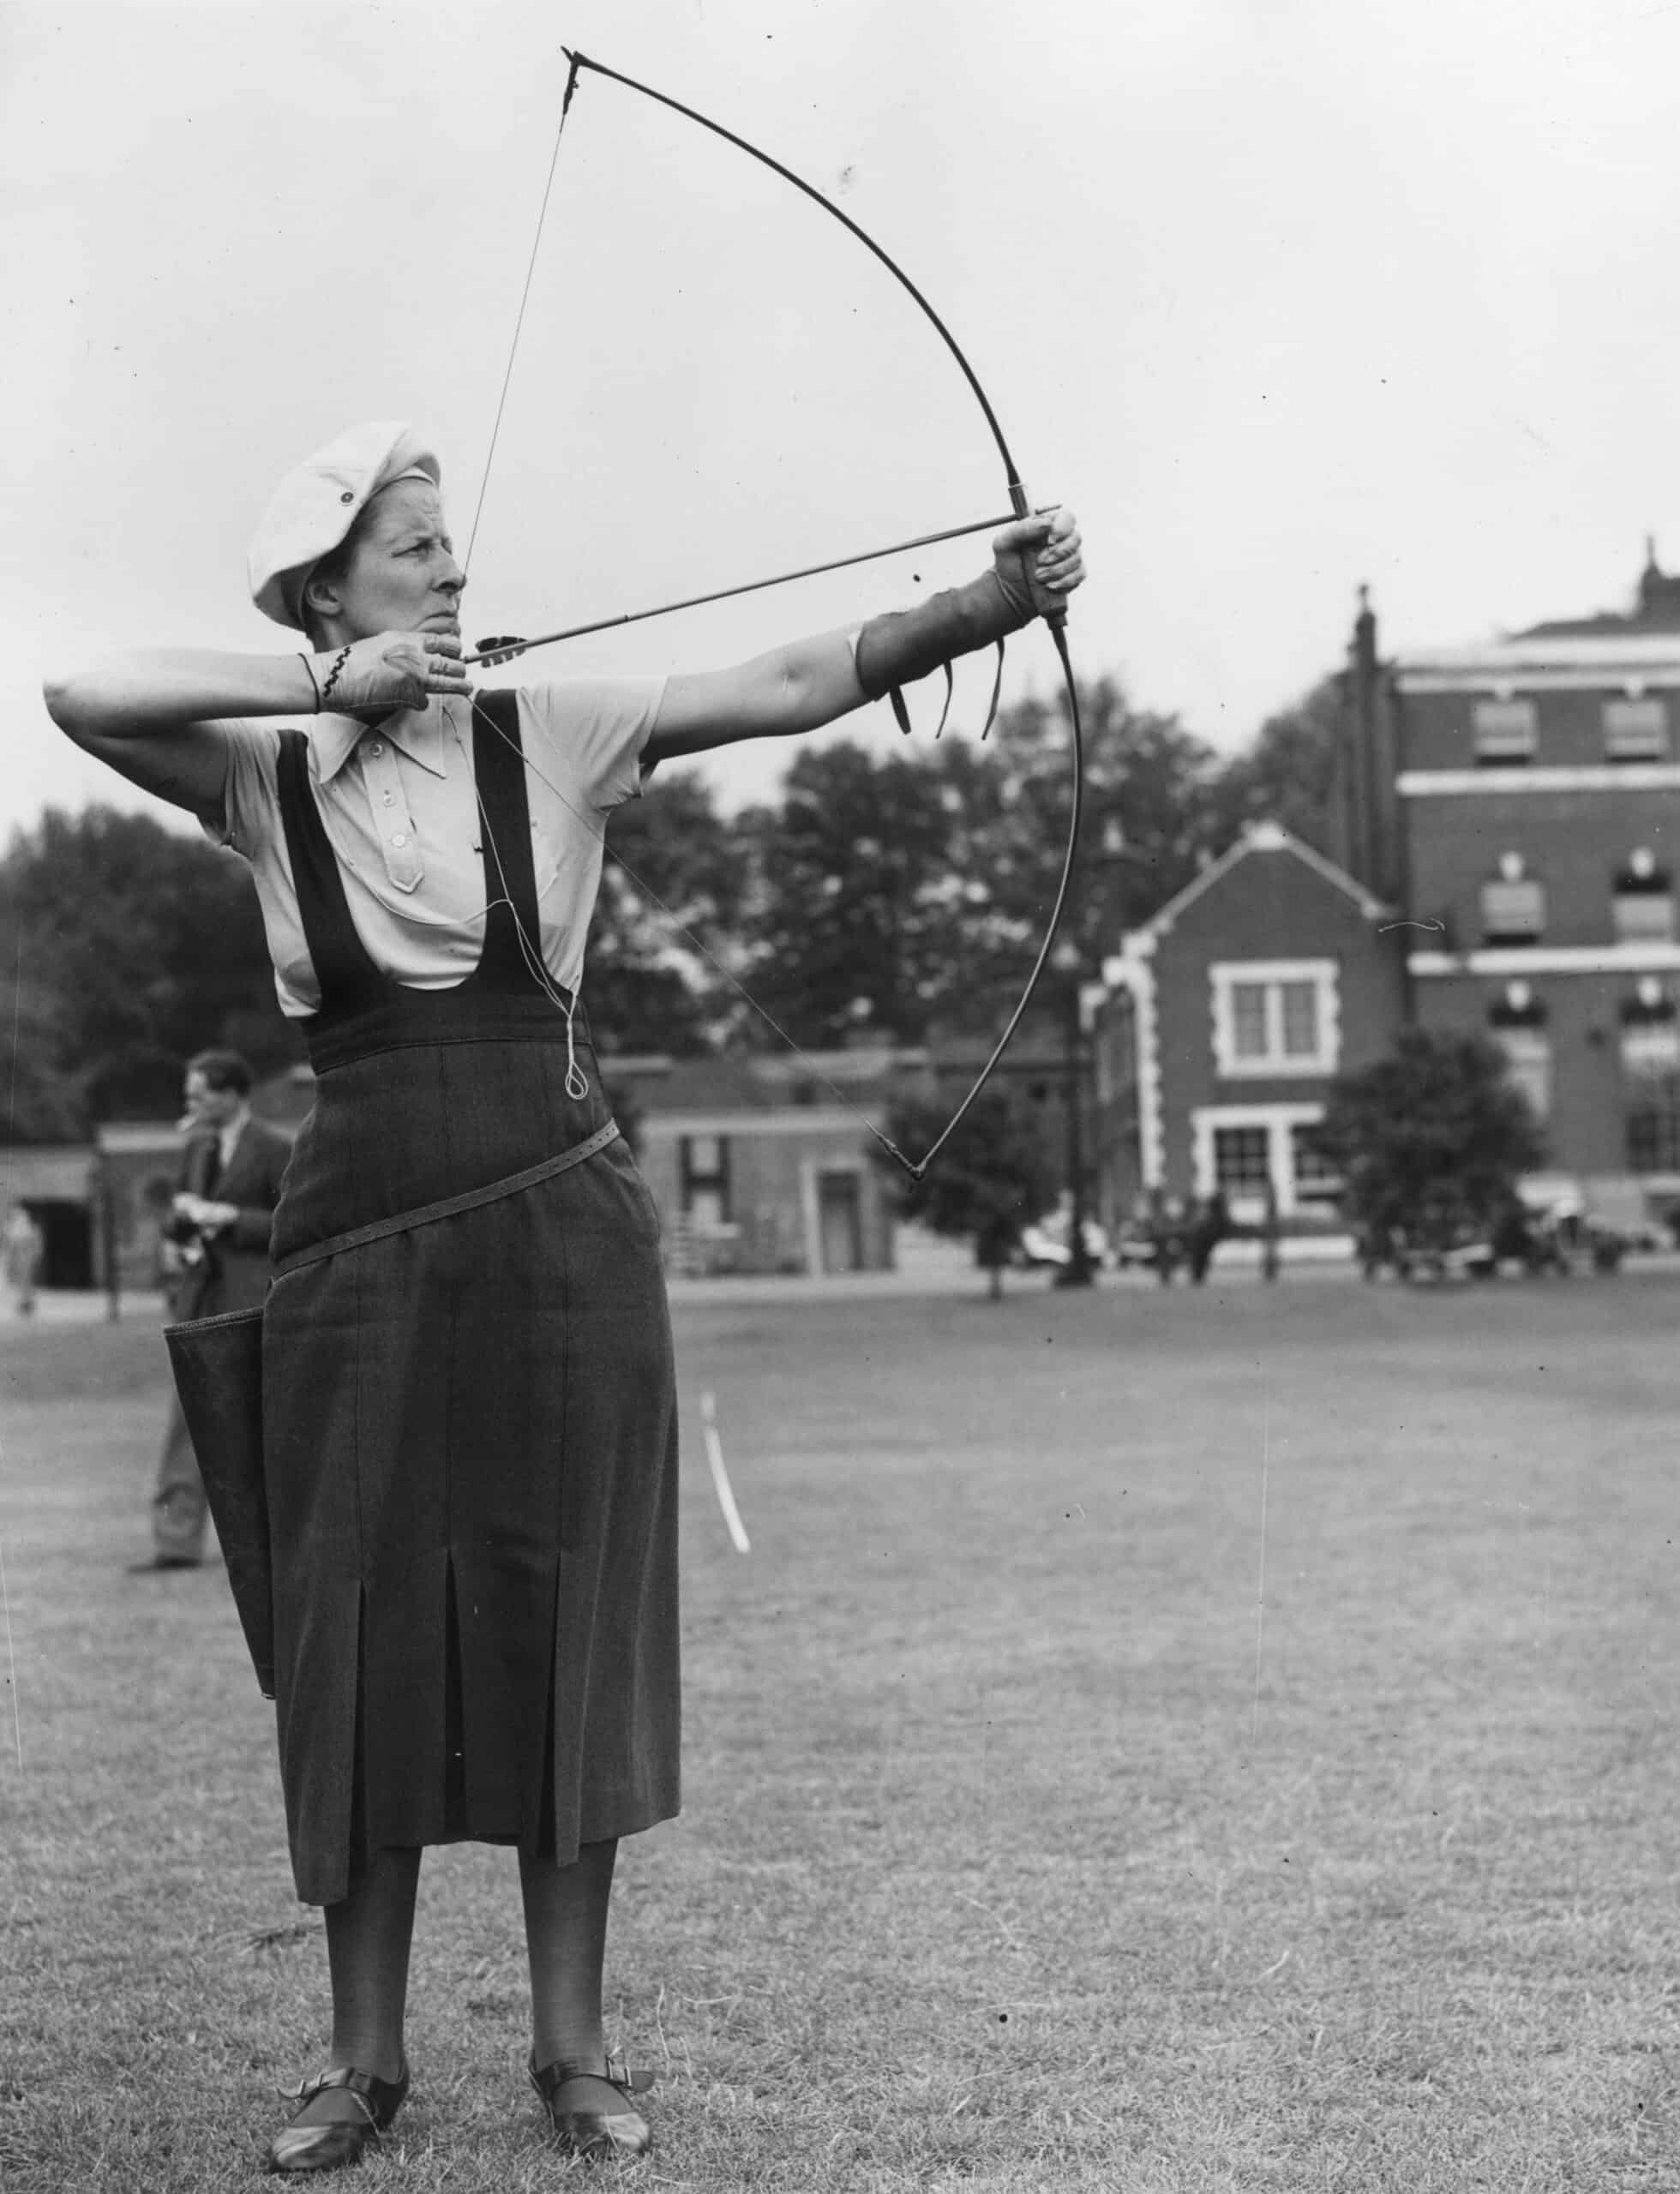 Vintage Photos of Women Getting Fit — 1900s Style - 24/7 Tempo